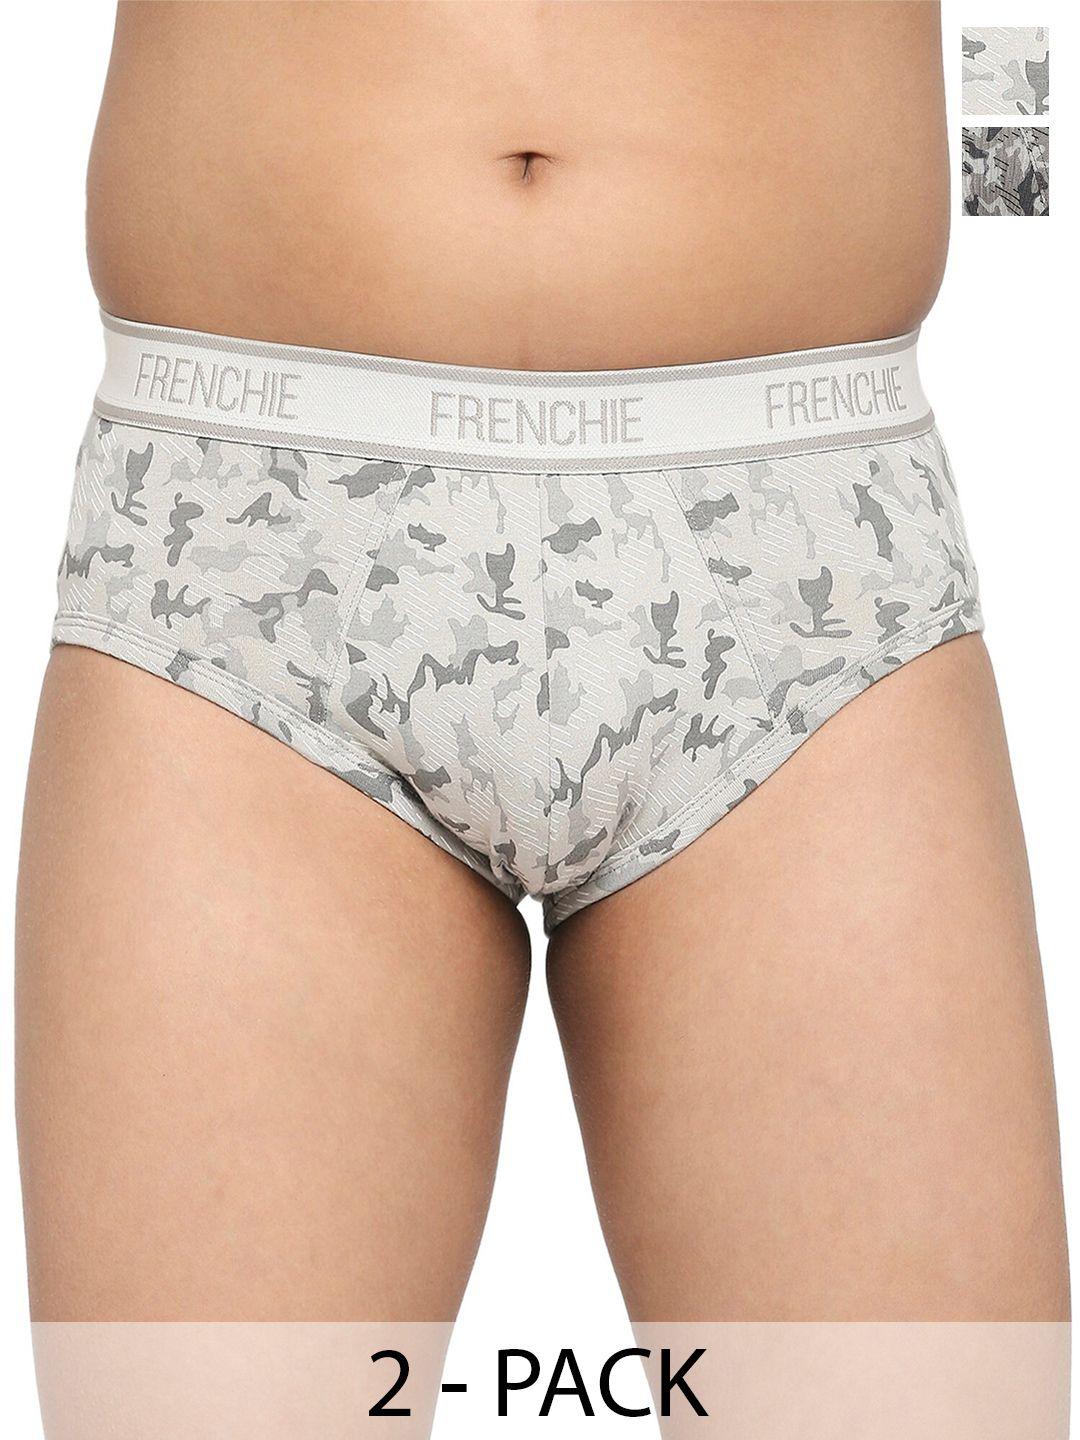 frenchie boys pack of 2 printed cotton hipster briefs fr-bf-u1904-1x5-gray-lgray-xs